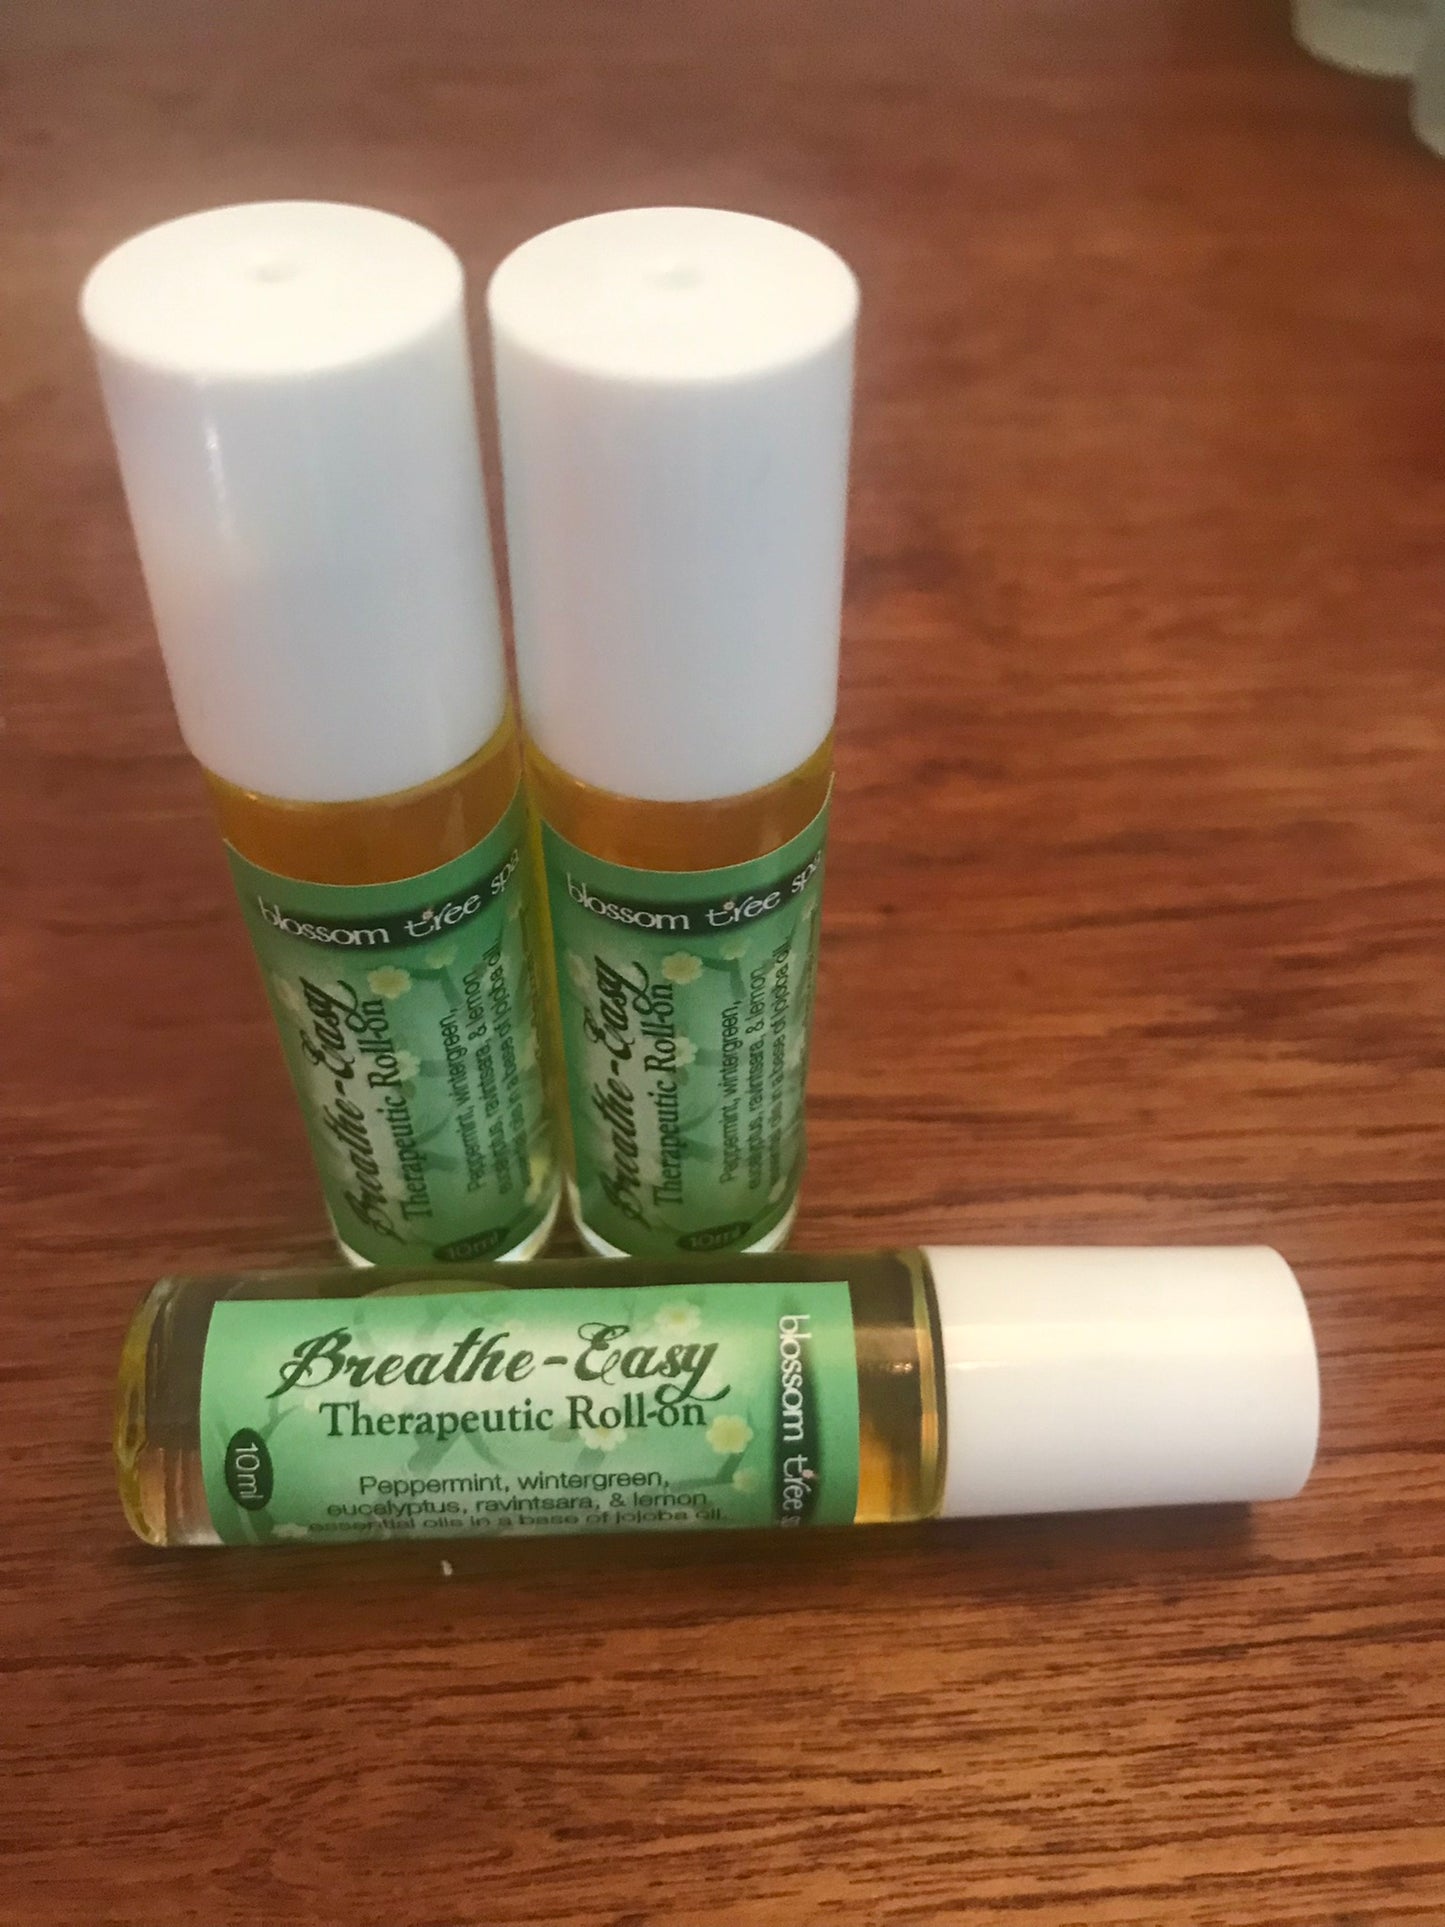 Breathe-easy therapeutic roll- on